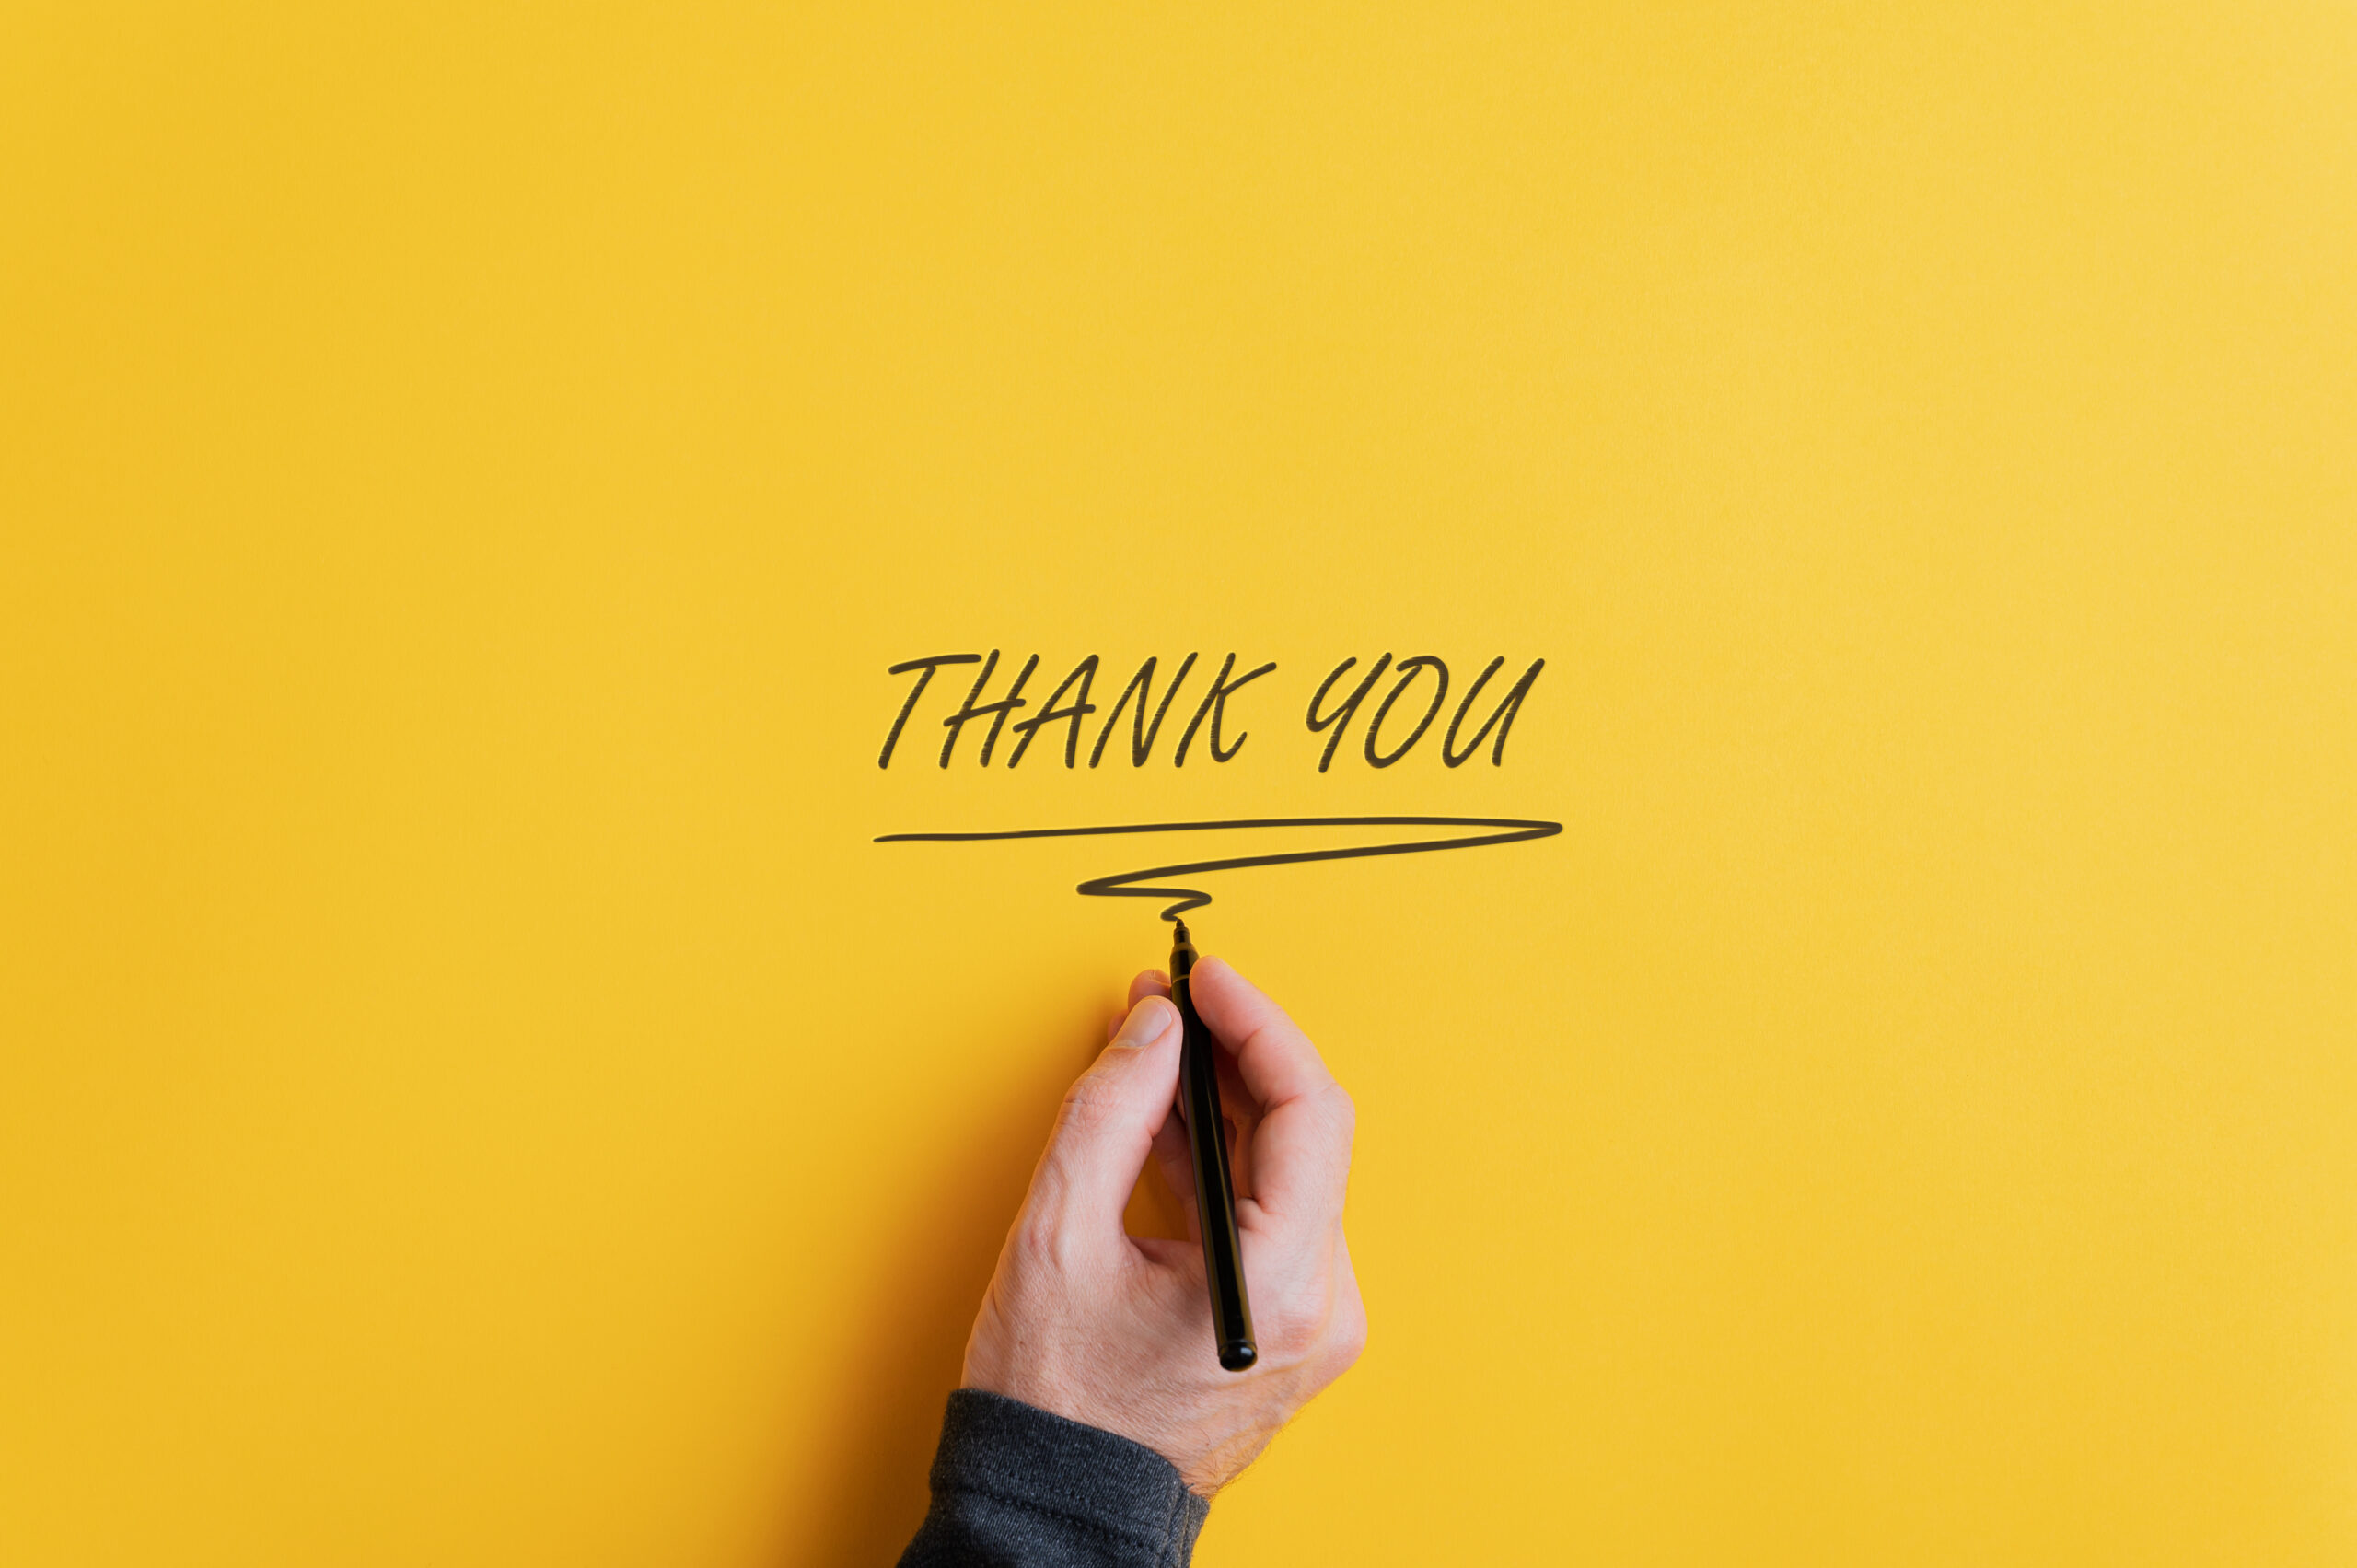 Male hand writing a Thank you sign with black marker on a yellow background. With copy space ready for your text.